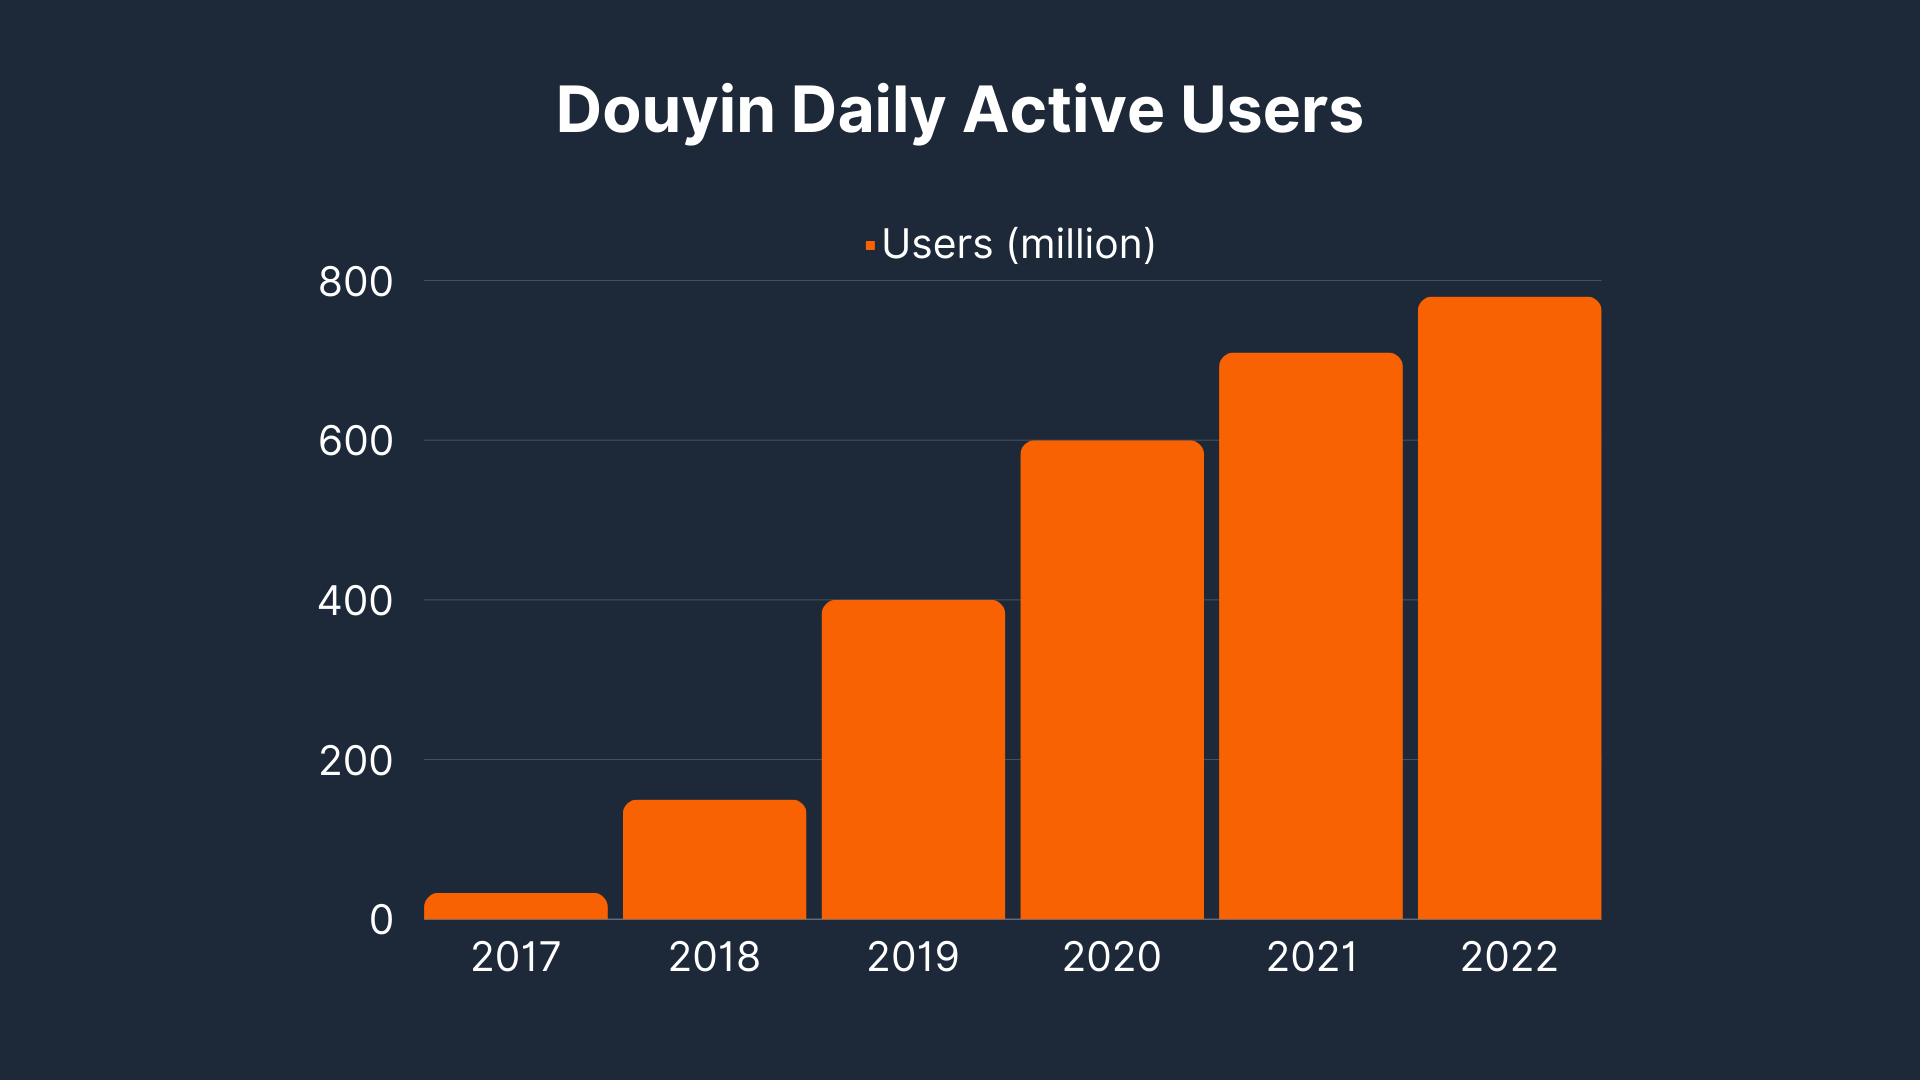 Douyin Daily Active Users 